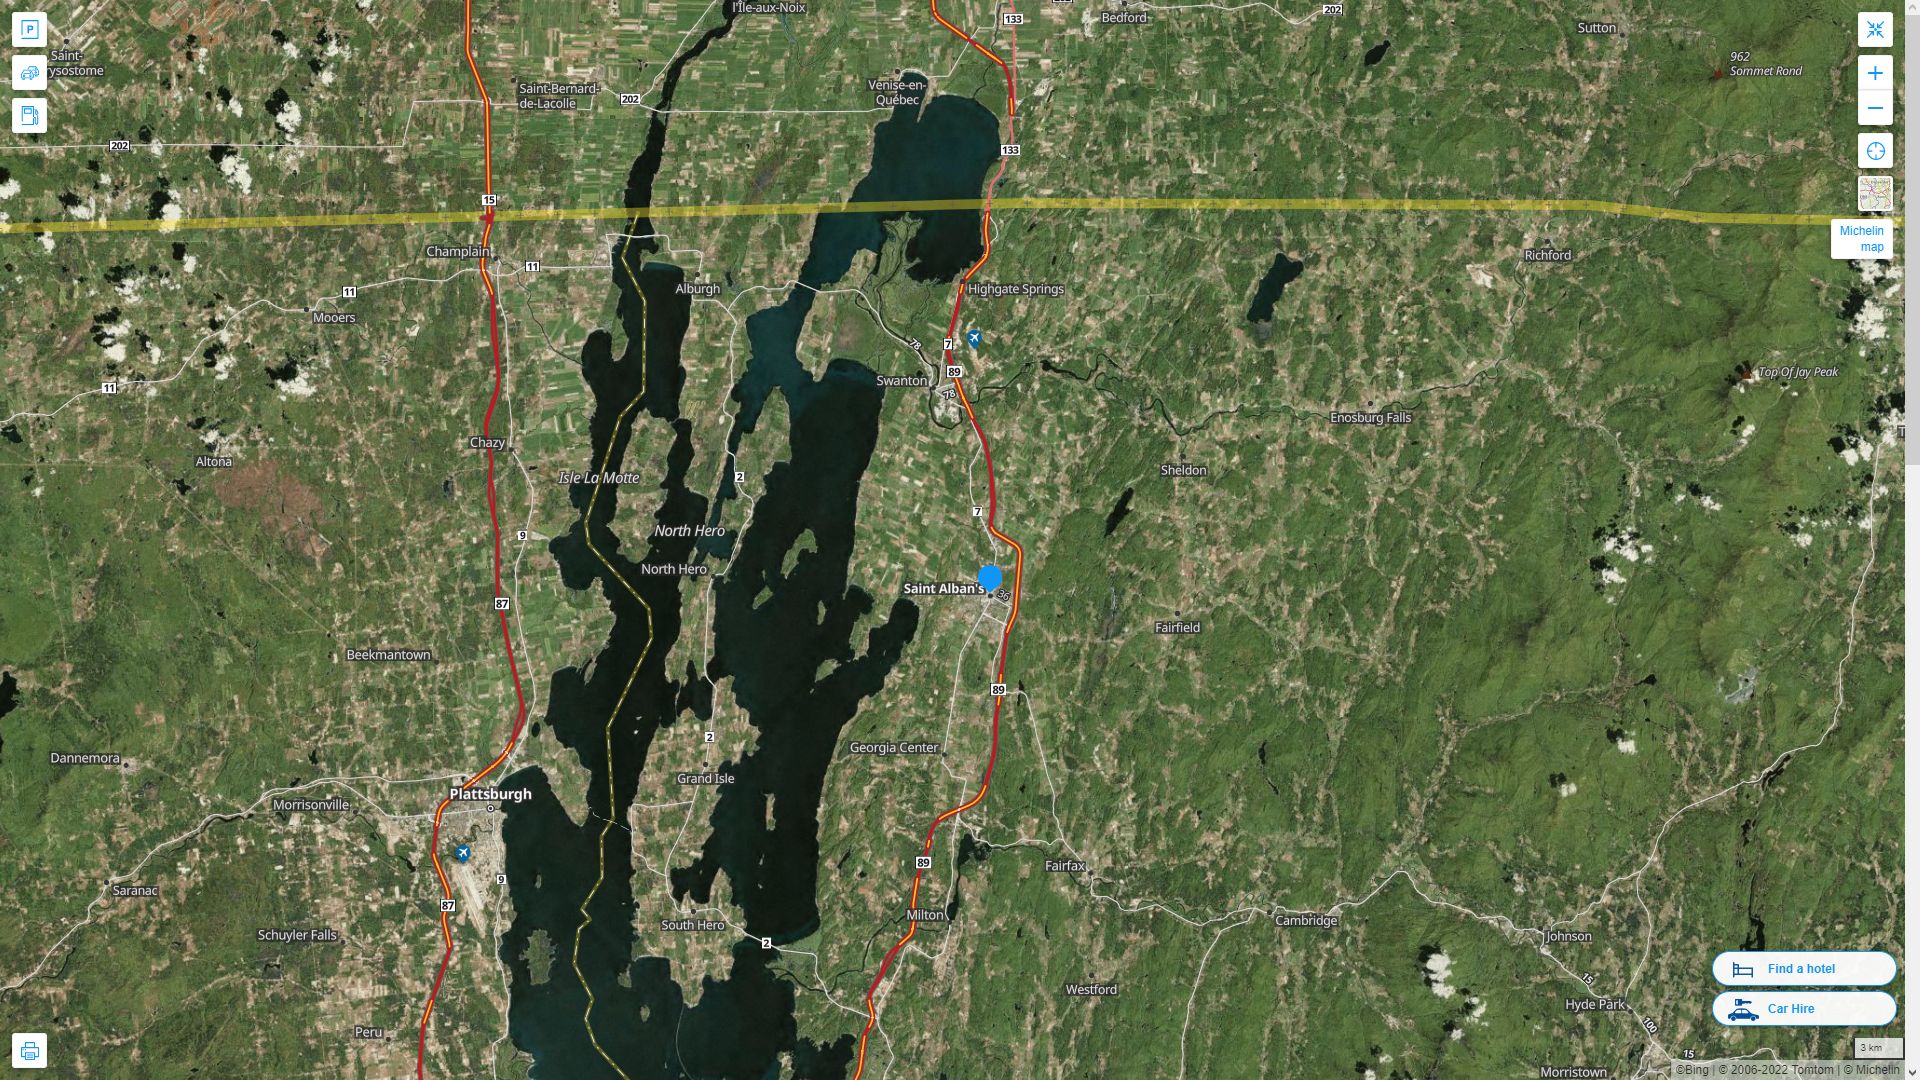 St. Albans Vermont Highway and Road Map with Satellite View